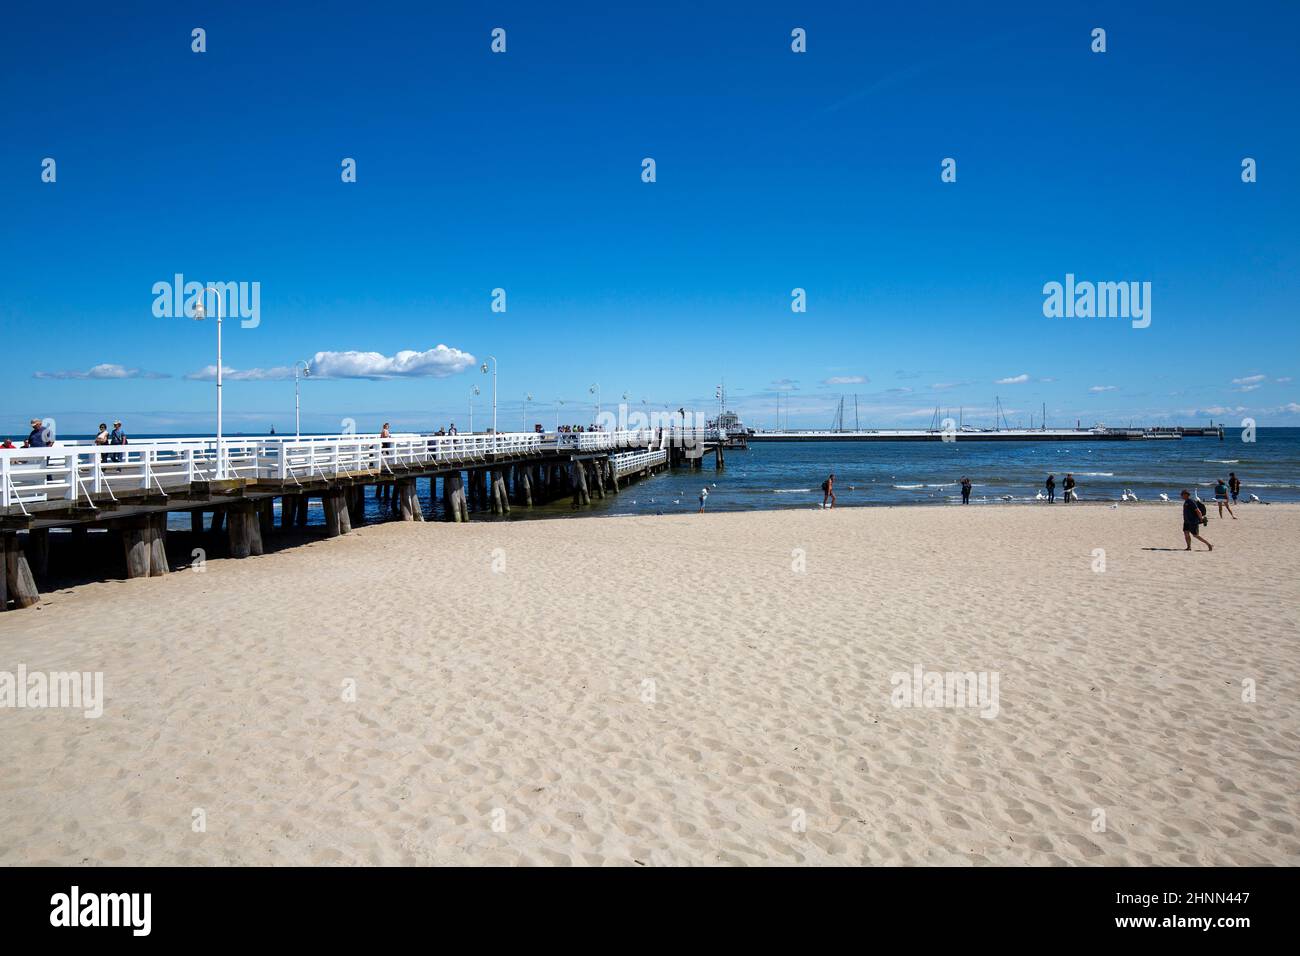 Wooden Sopot pier in sunny day, view from the sandy beach, Sopot, Poland Stock Photo